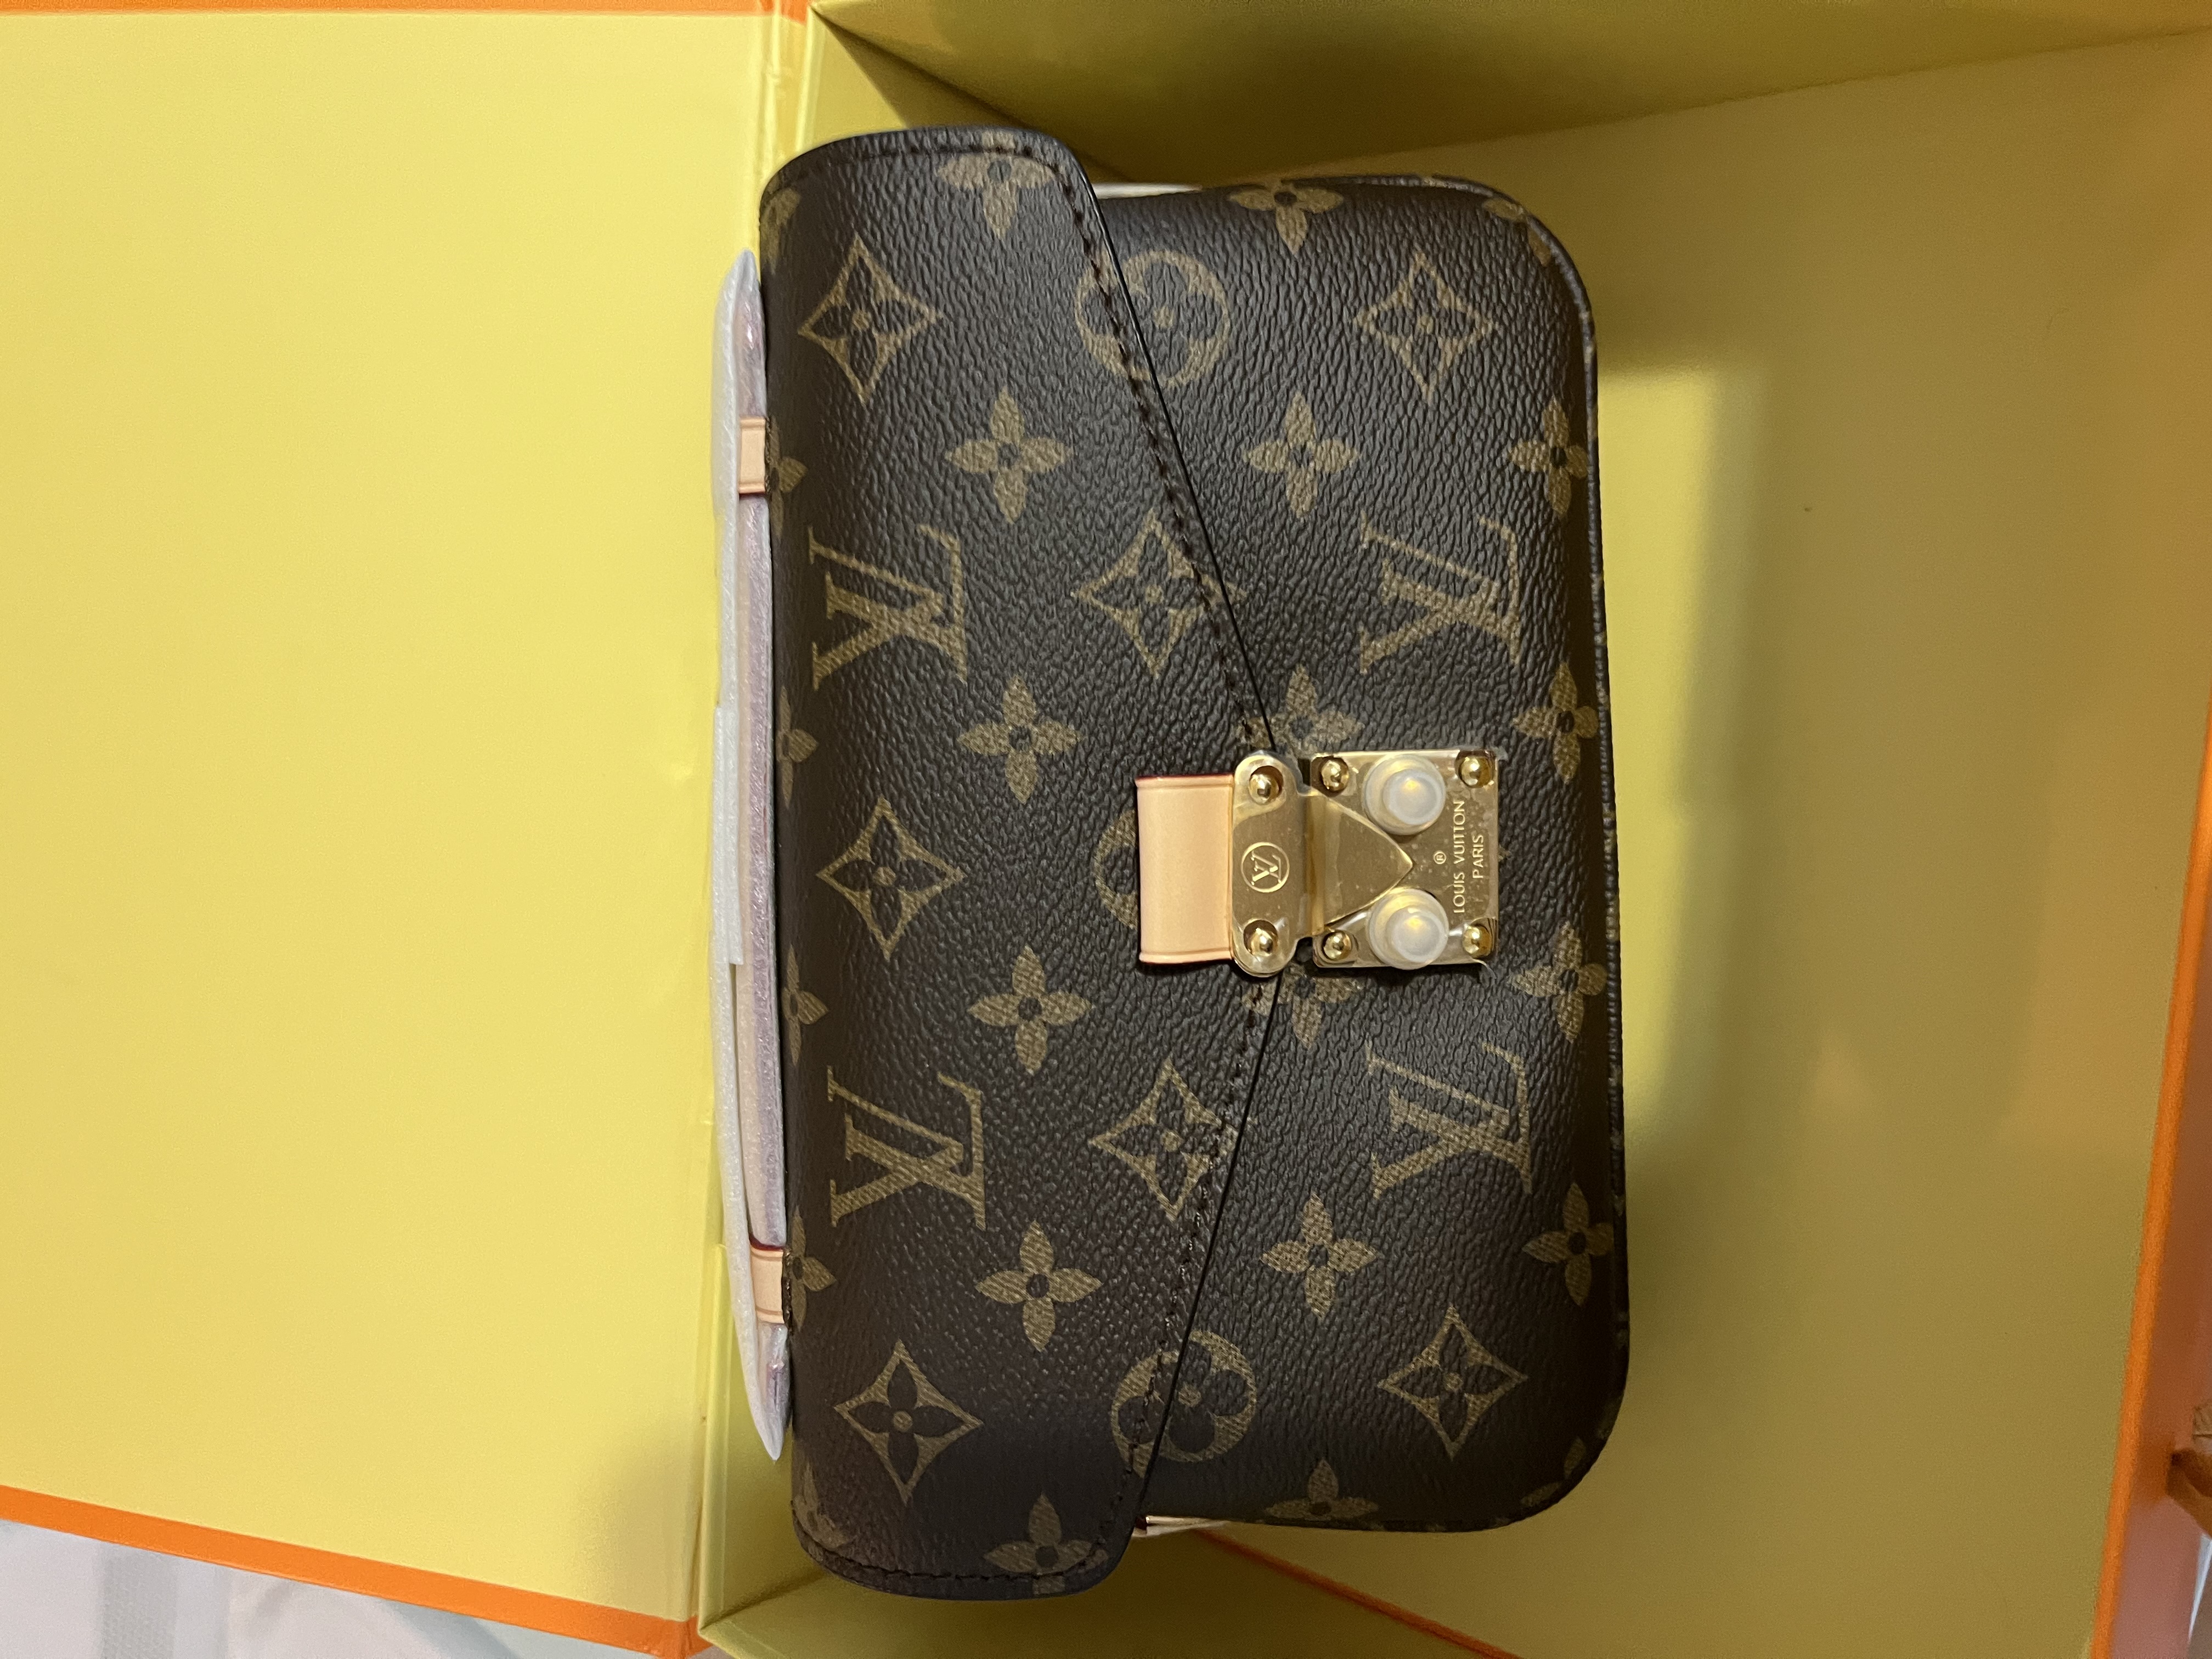 Do people like the smell of new leather bags from luxury brands like Louis  Vuitton (LV), Chanel or Gucci? - Quora